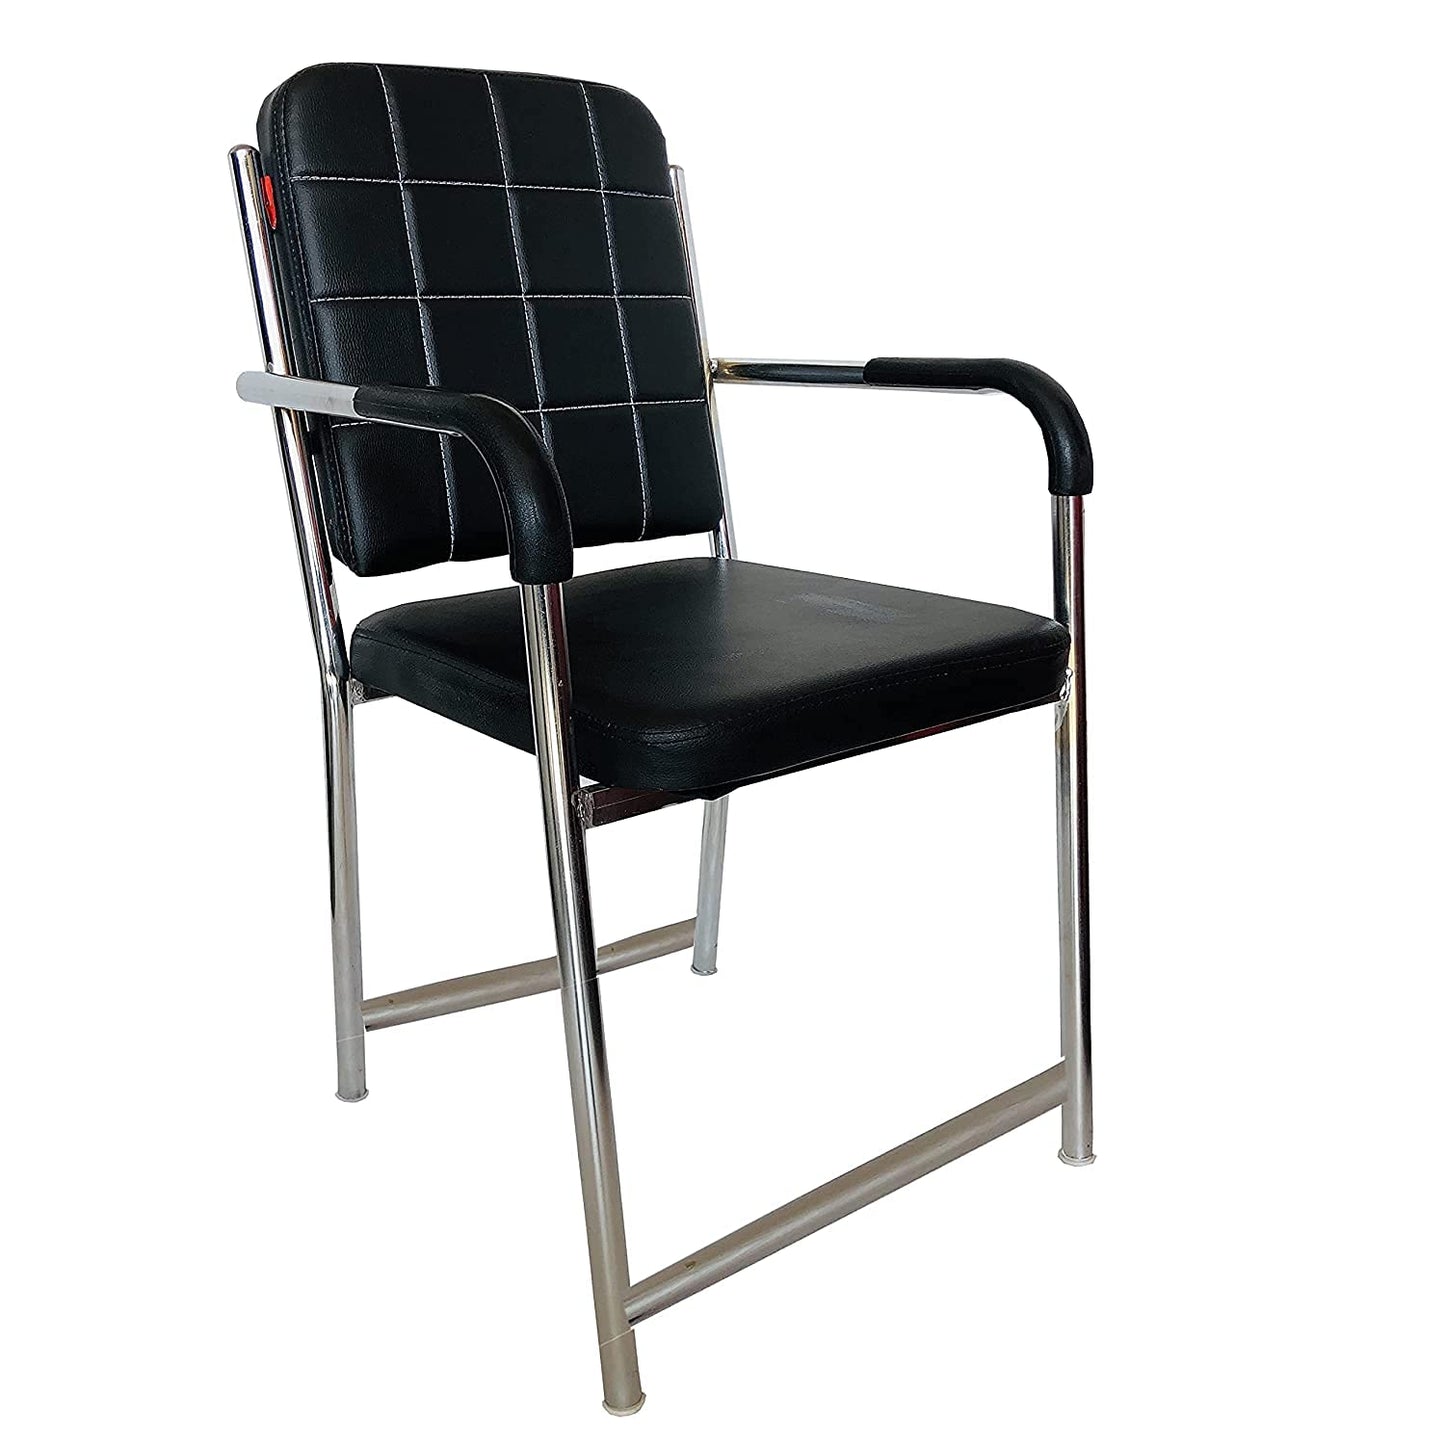 Bowzar Office Chair Visitor Chair with arm Rest with Steel Frame and cushoined seat Back Chair Without Wheels Black